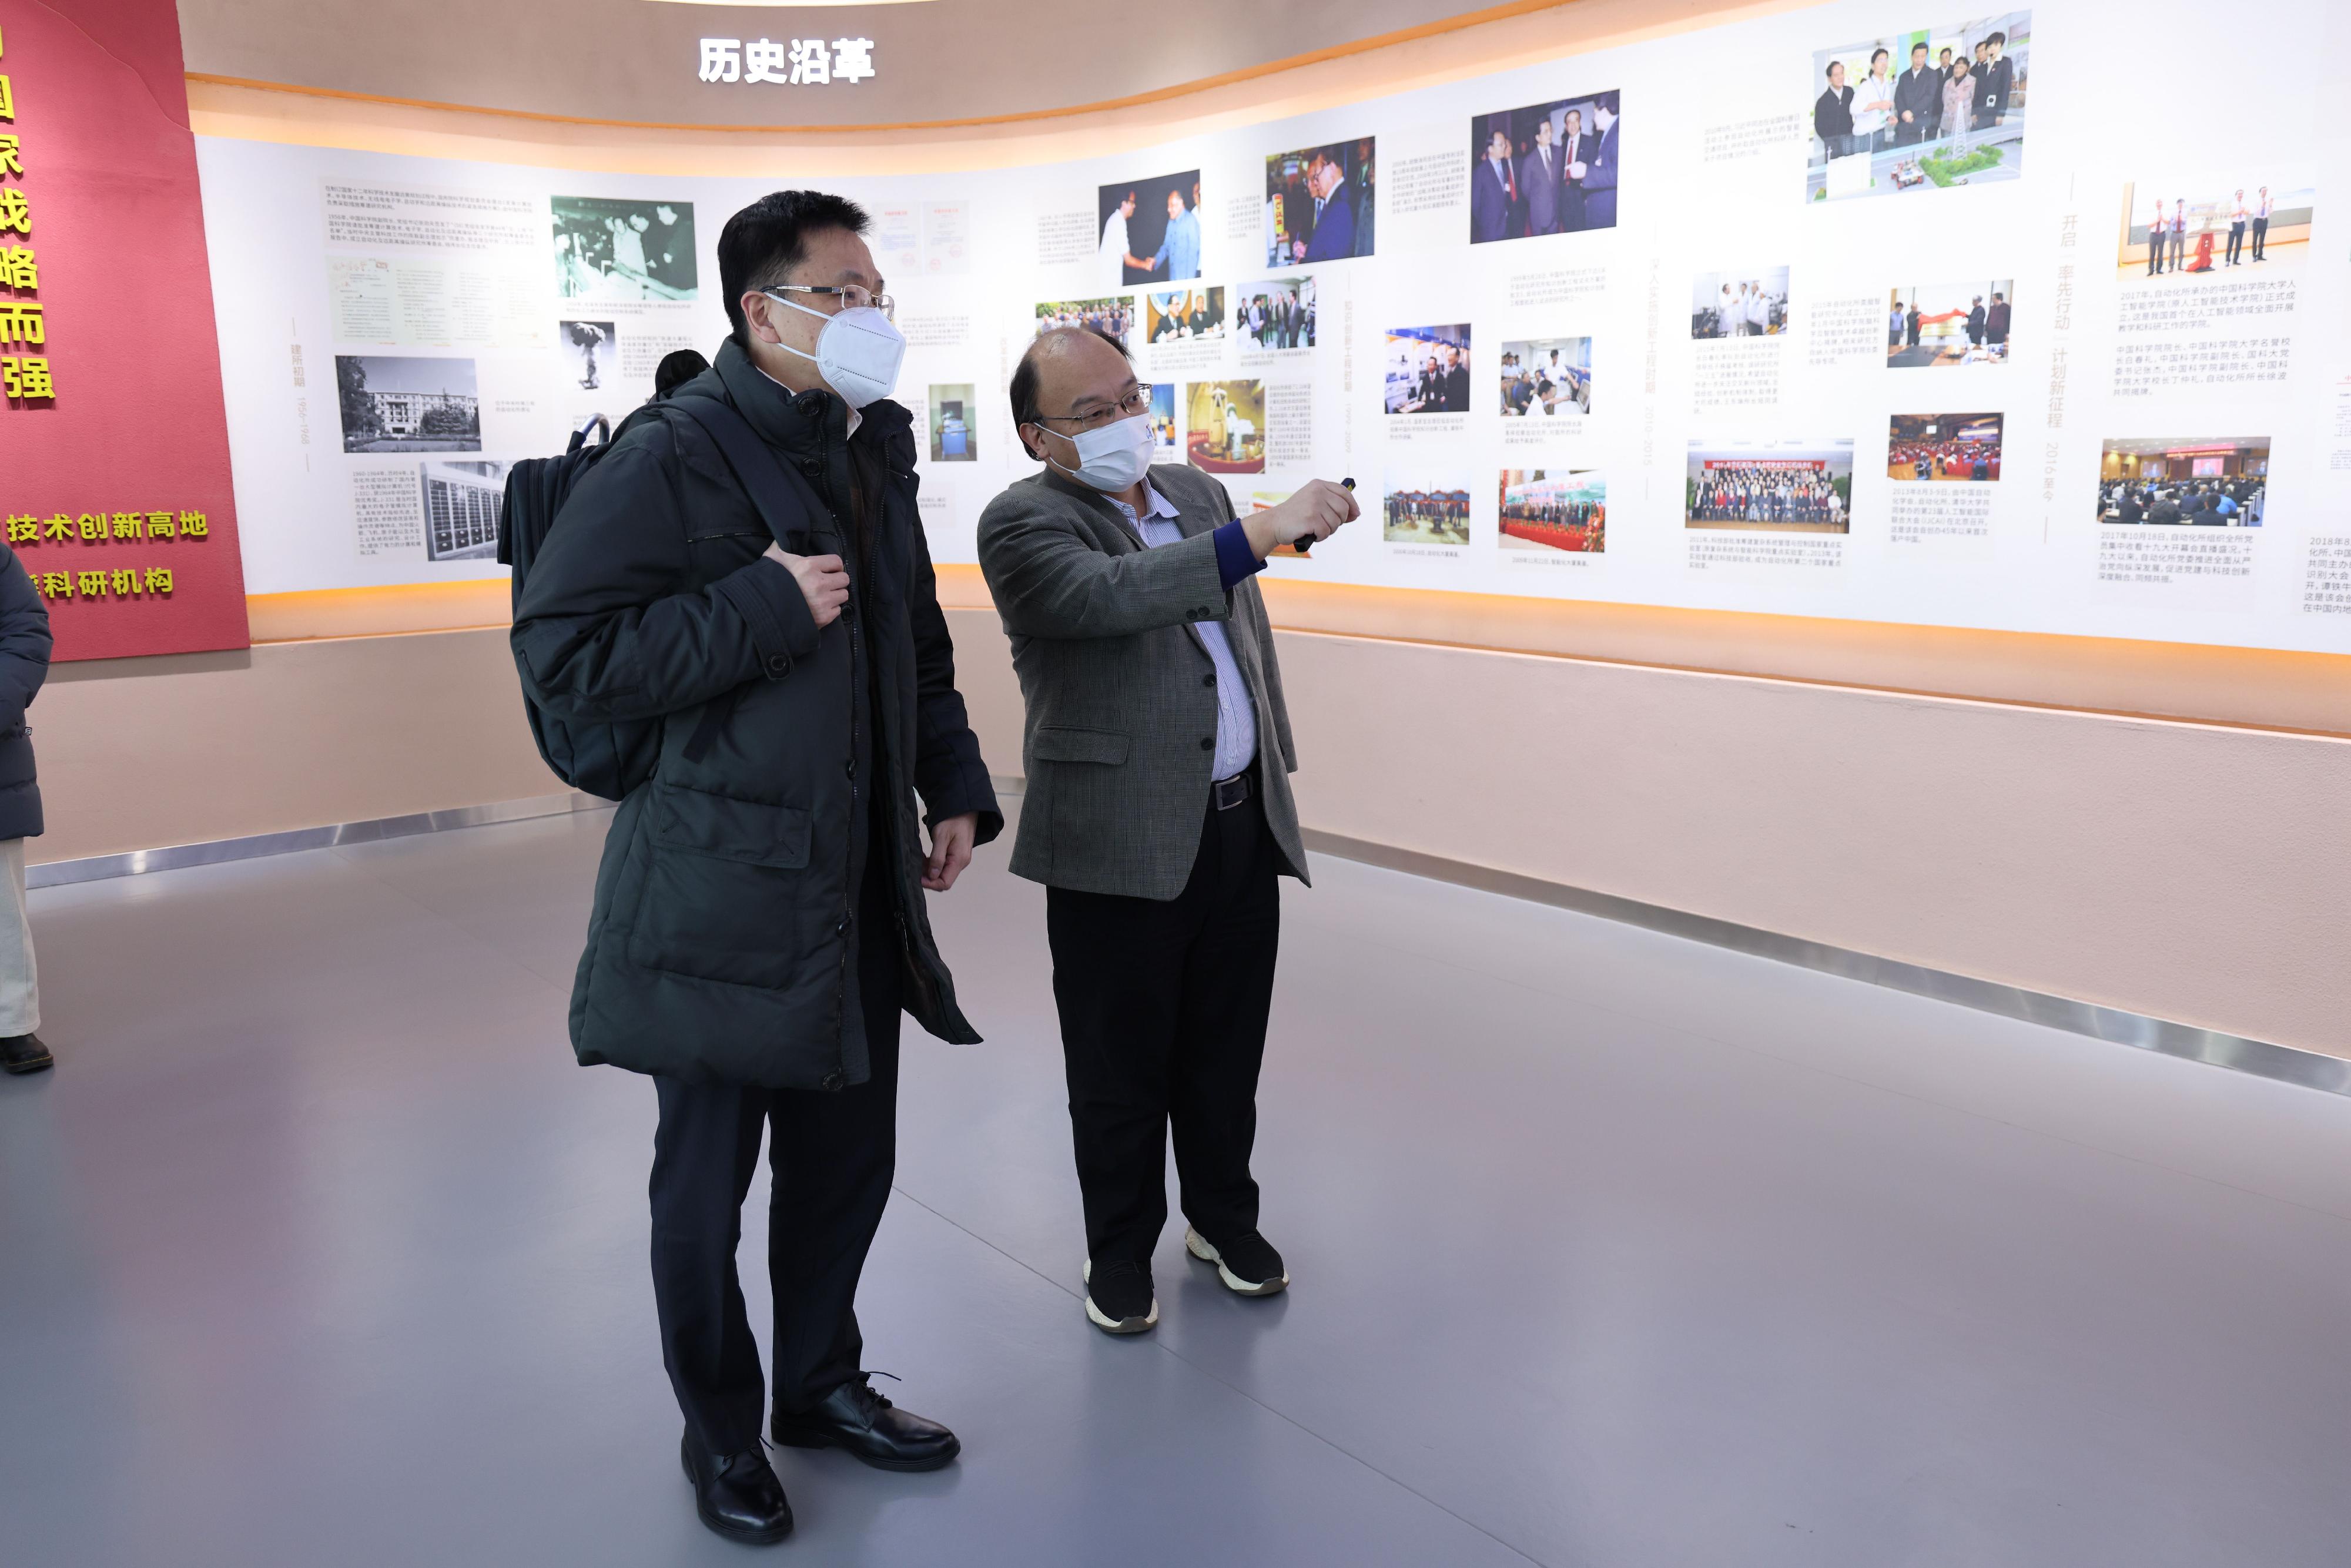 The Secretary for Innovation, Technology and Industry, Professor Sun Dong (left), tours the Institute of Automation of the Chinese Academy of Sciences (CASIA) in Beijing today (January 16) and receives a briefing by the Deputy President of CASIA, Mr Zeng Dajun (right) on the CASIA’s achievements in the artificial intelligence area and relevant commercialisation projects.